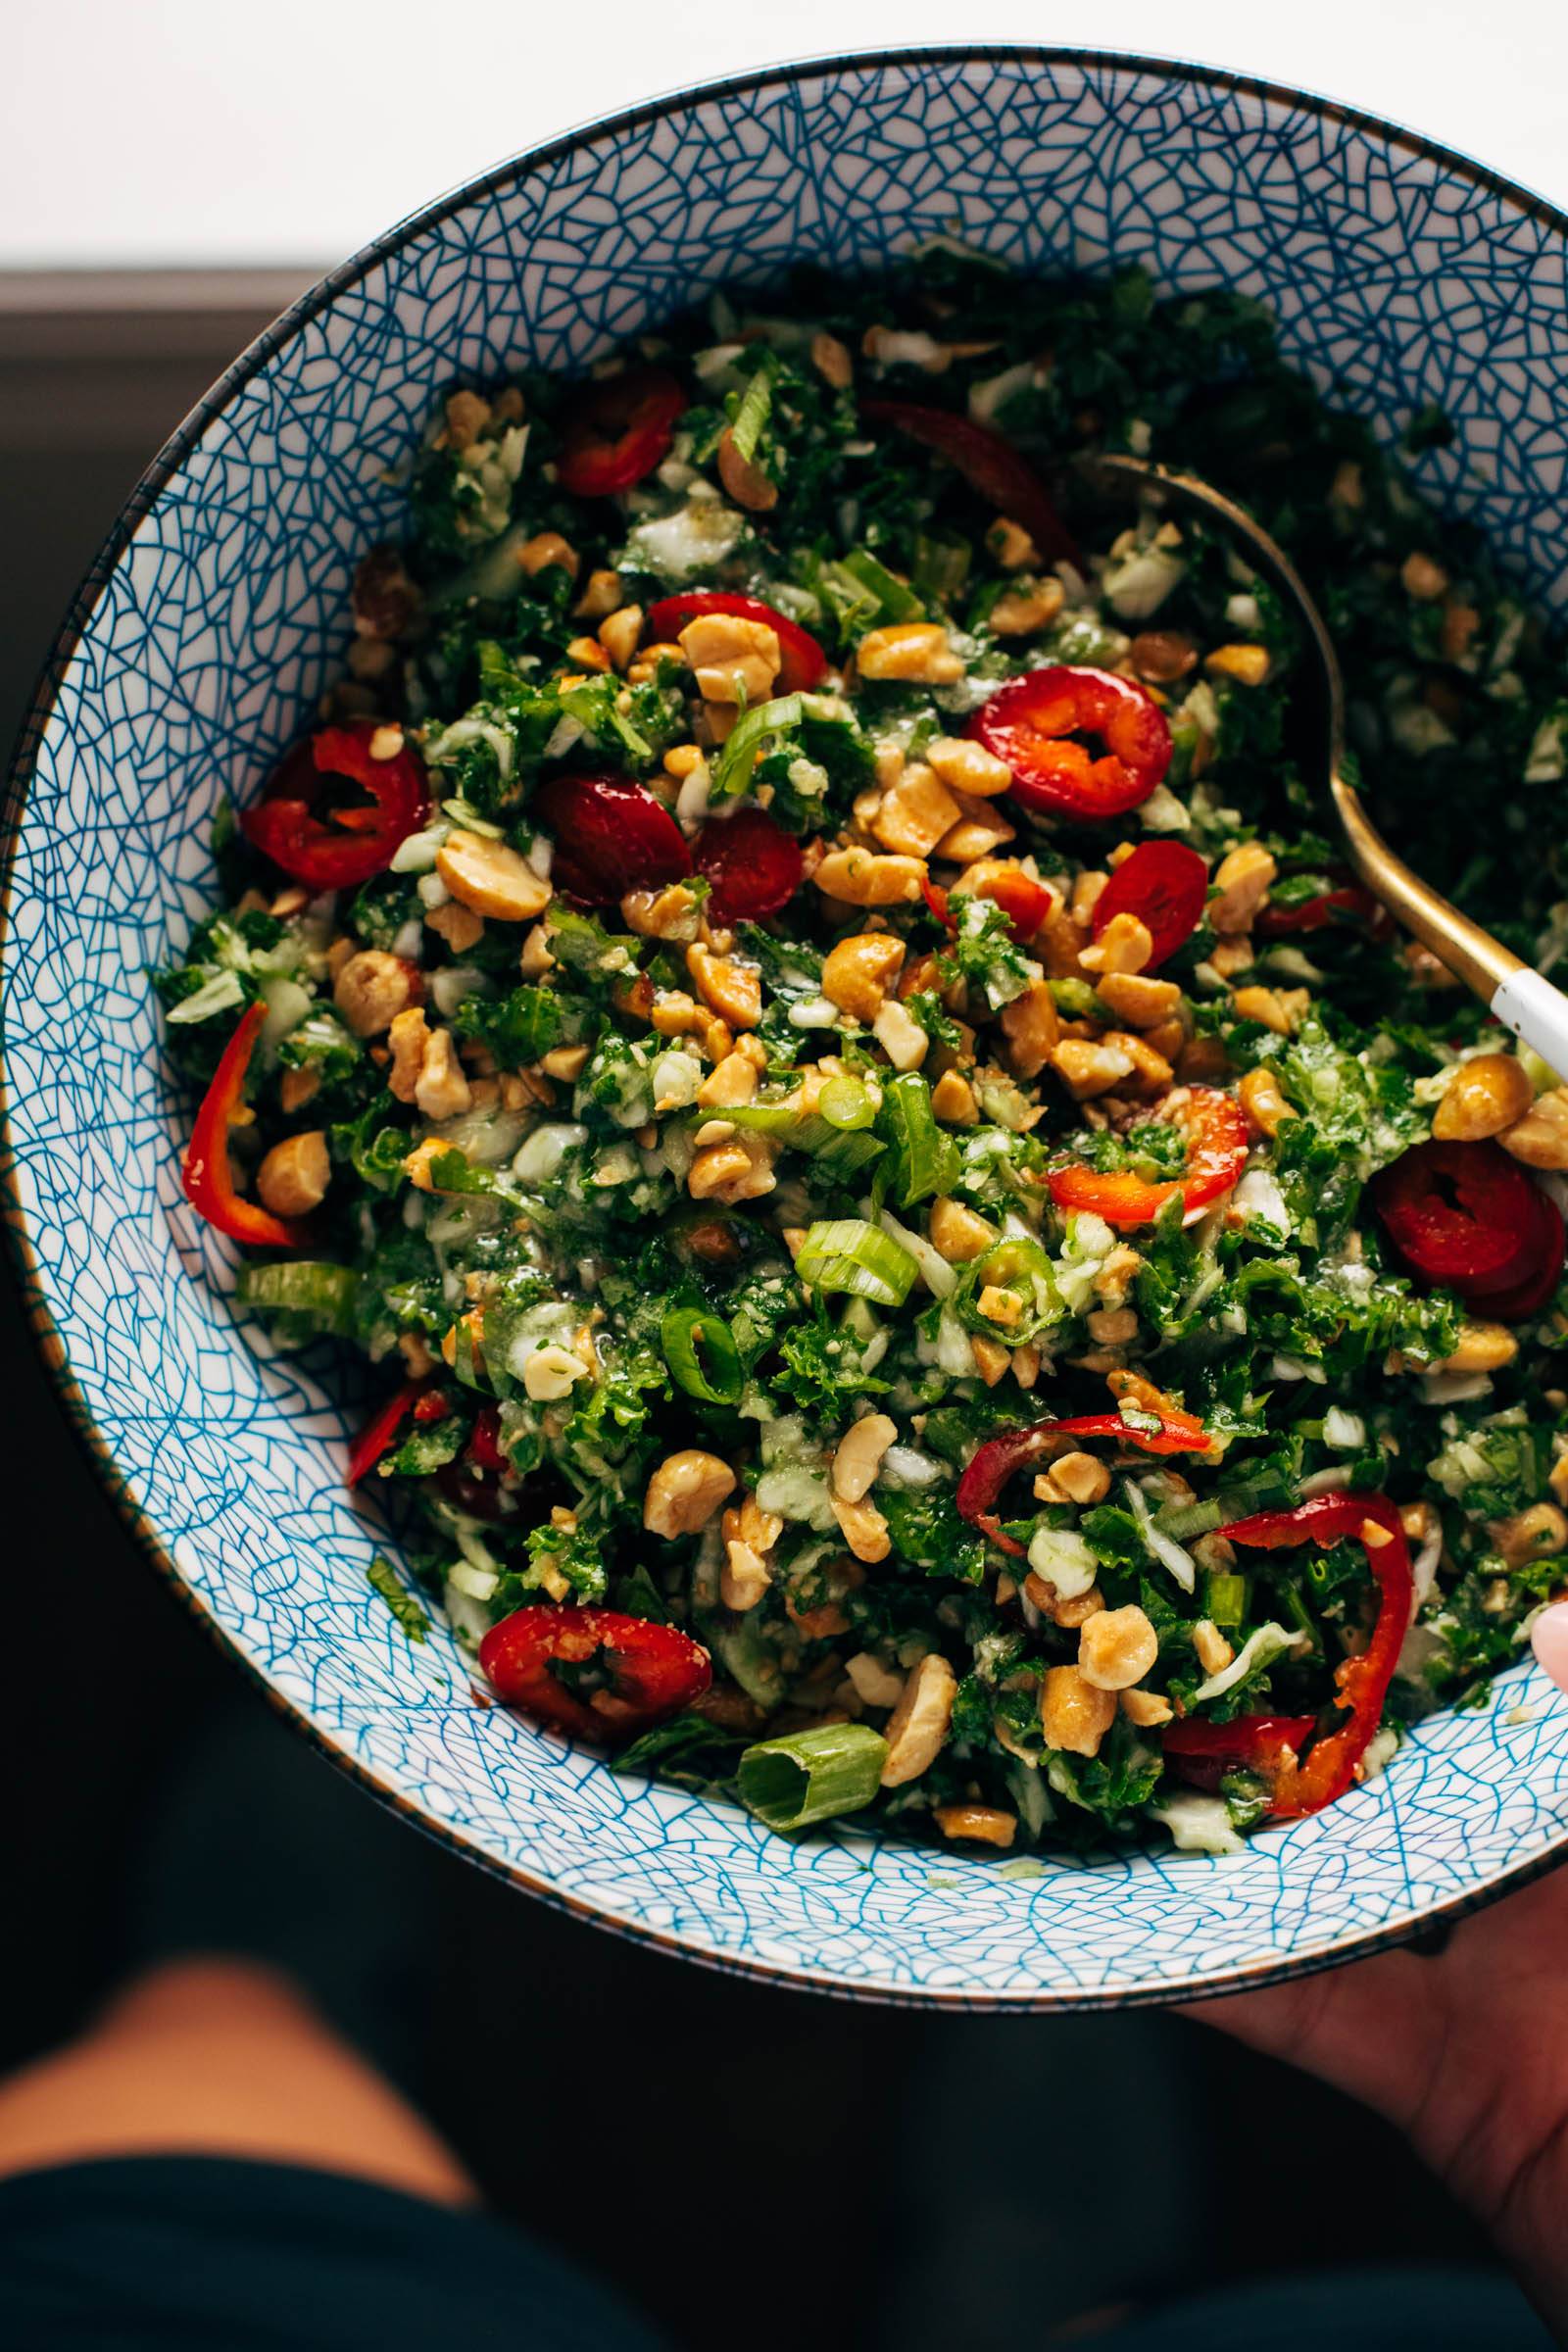 Crunchy Kale Salad with Roasted Peanuts in a Blue Bowl